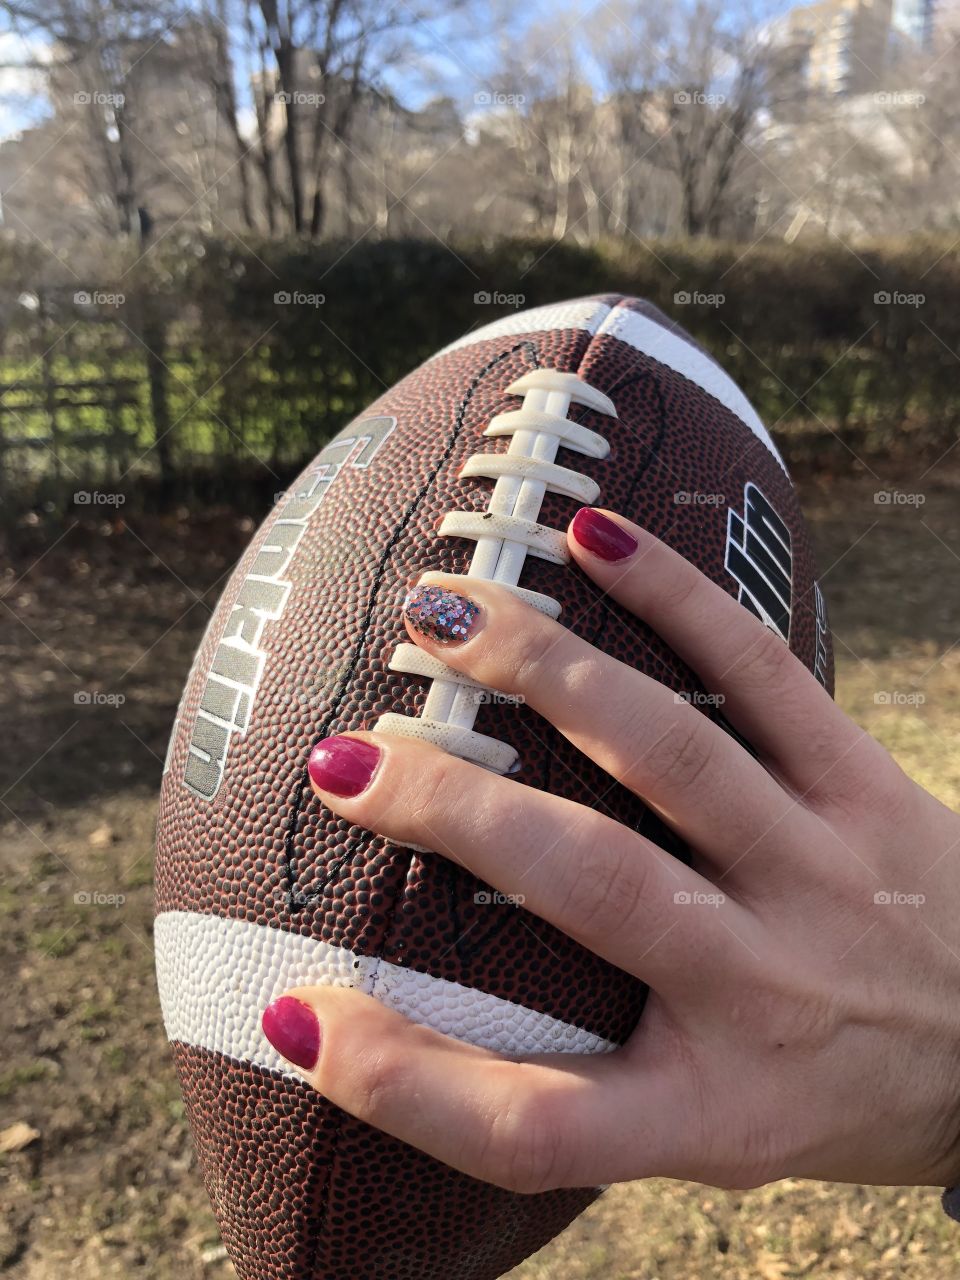 Football with sparkle nails